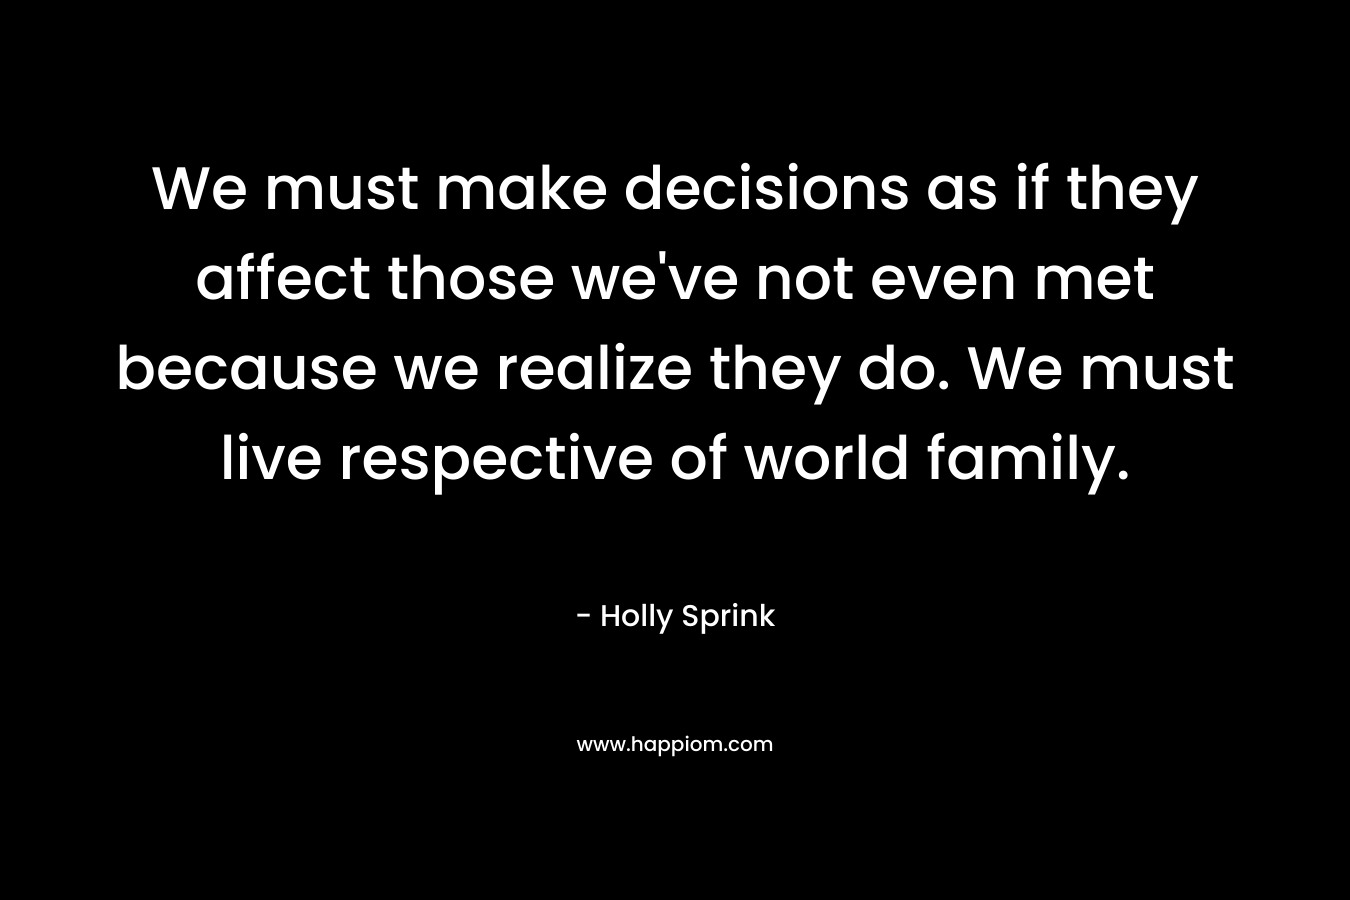 We must make decisions as if they affect those we've not even met because we realize they do. We must live respective of world family.